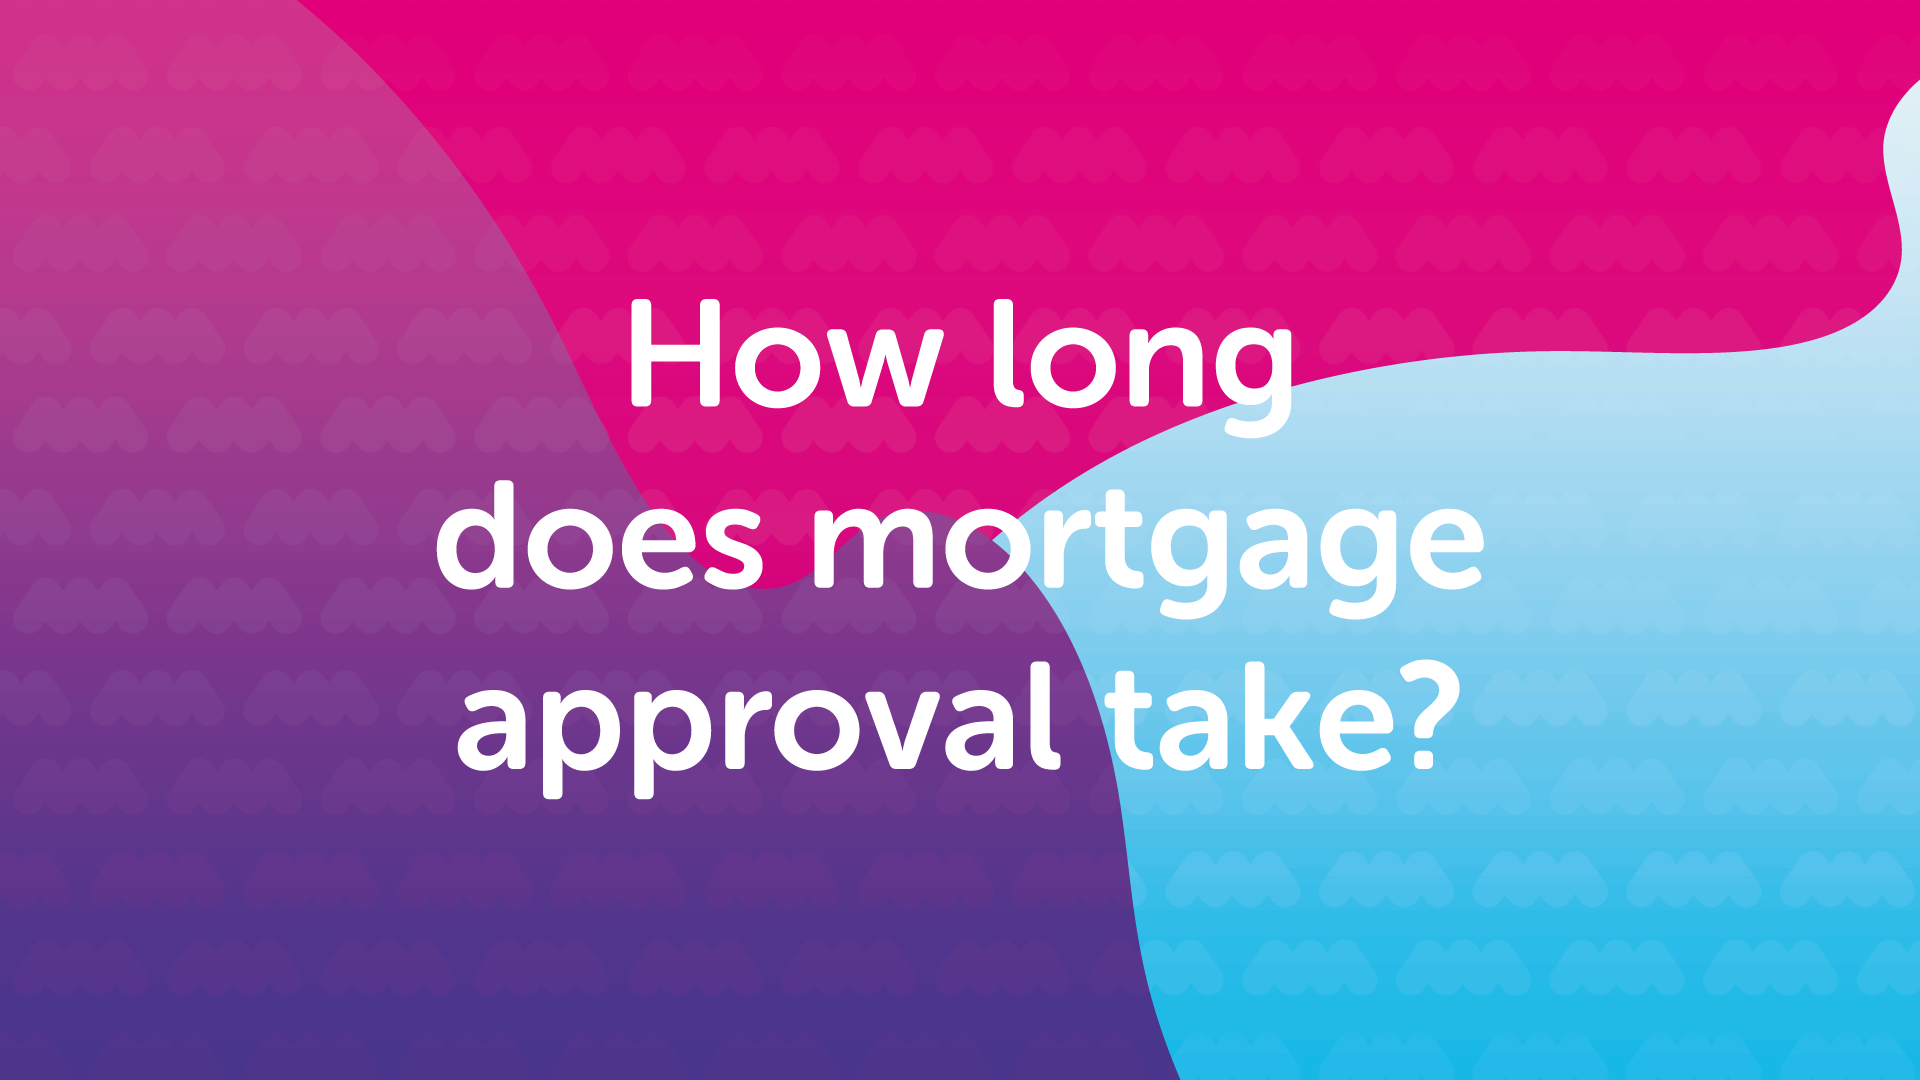 How long does a mortgage approval take in Newcastle